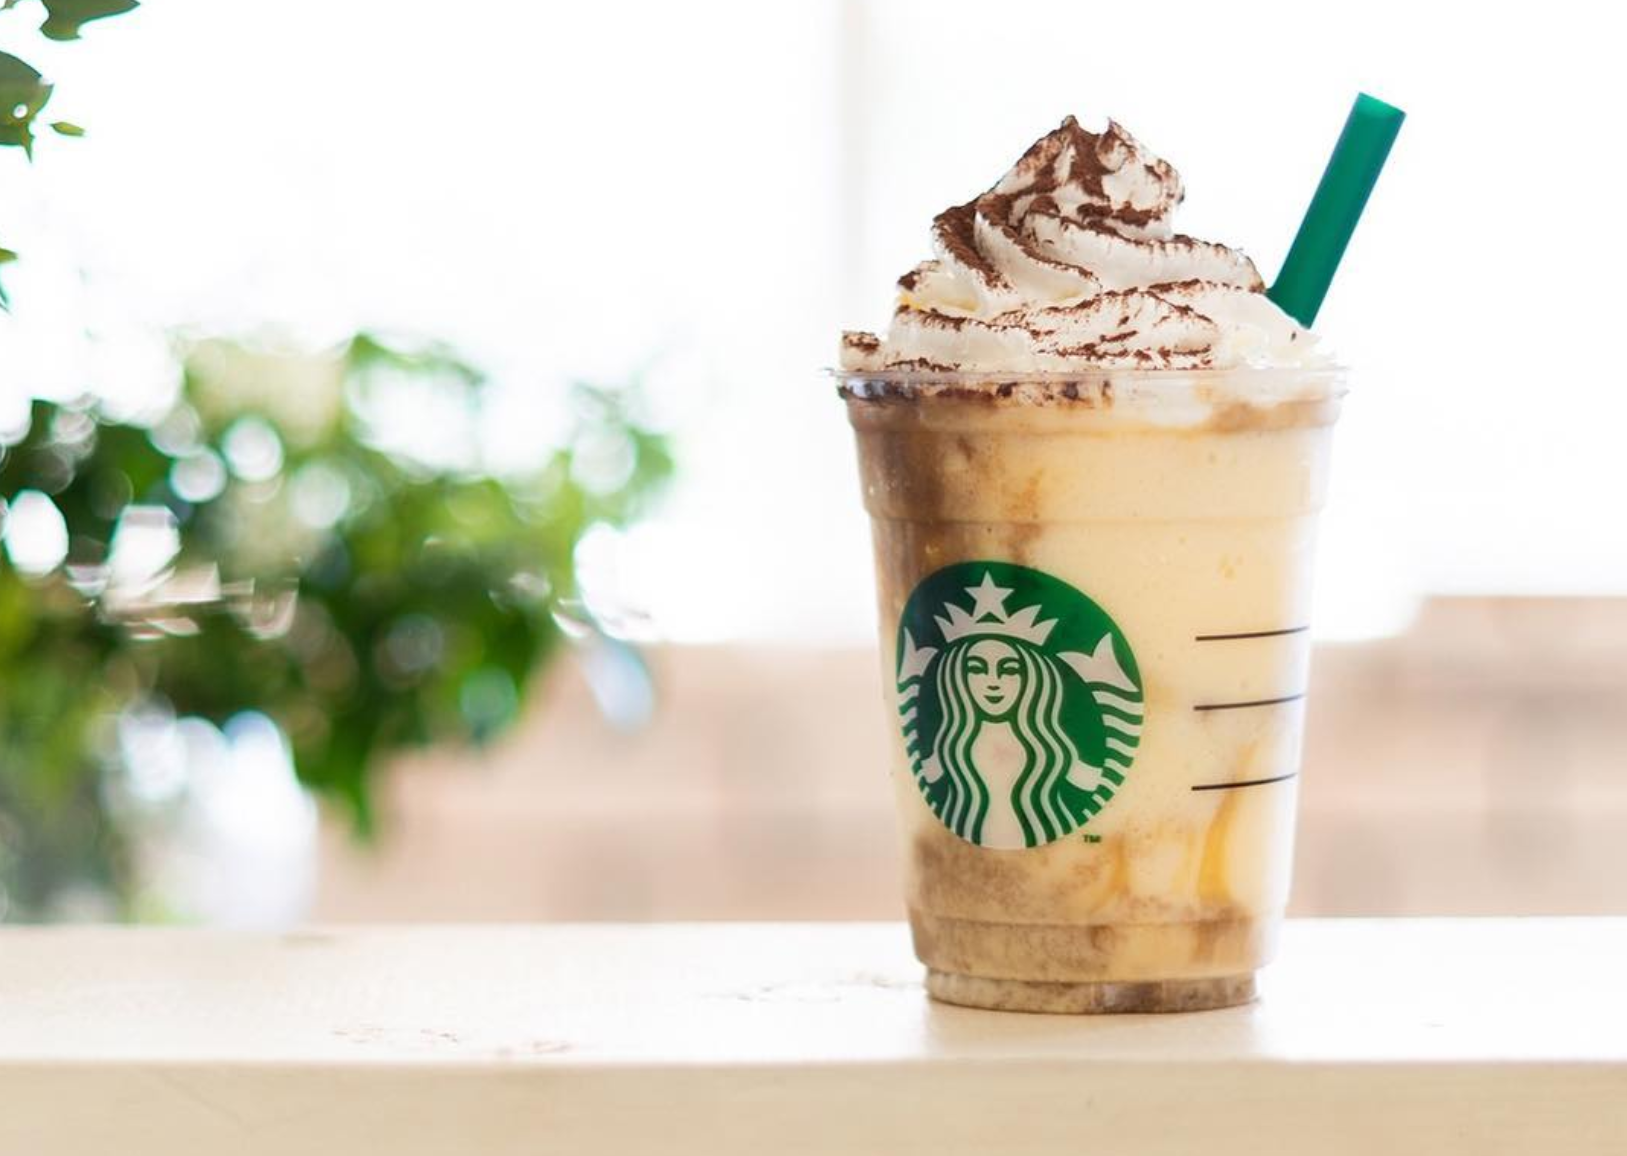 Starbucks Announces New Tiramisu Frappuccino - But Only in Japan.